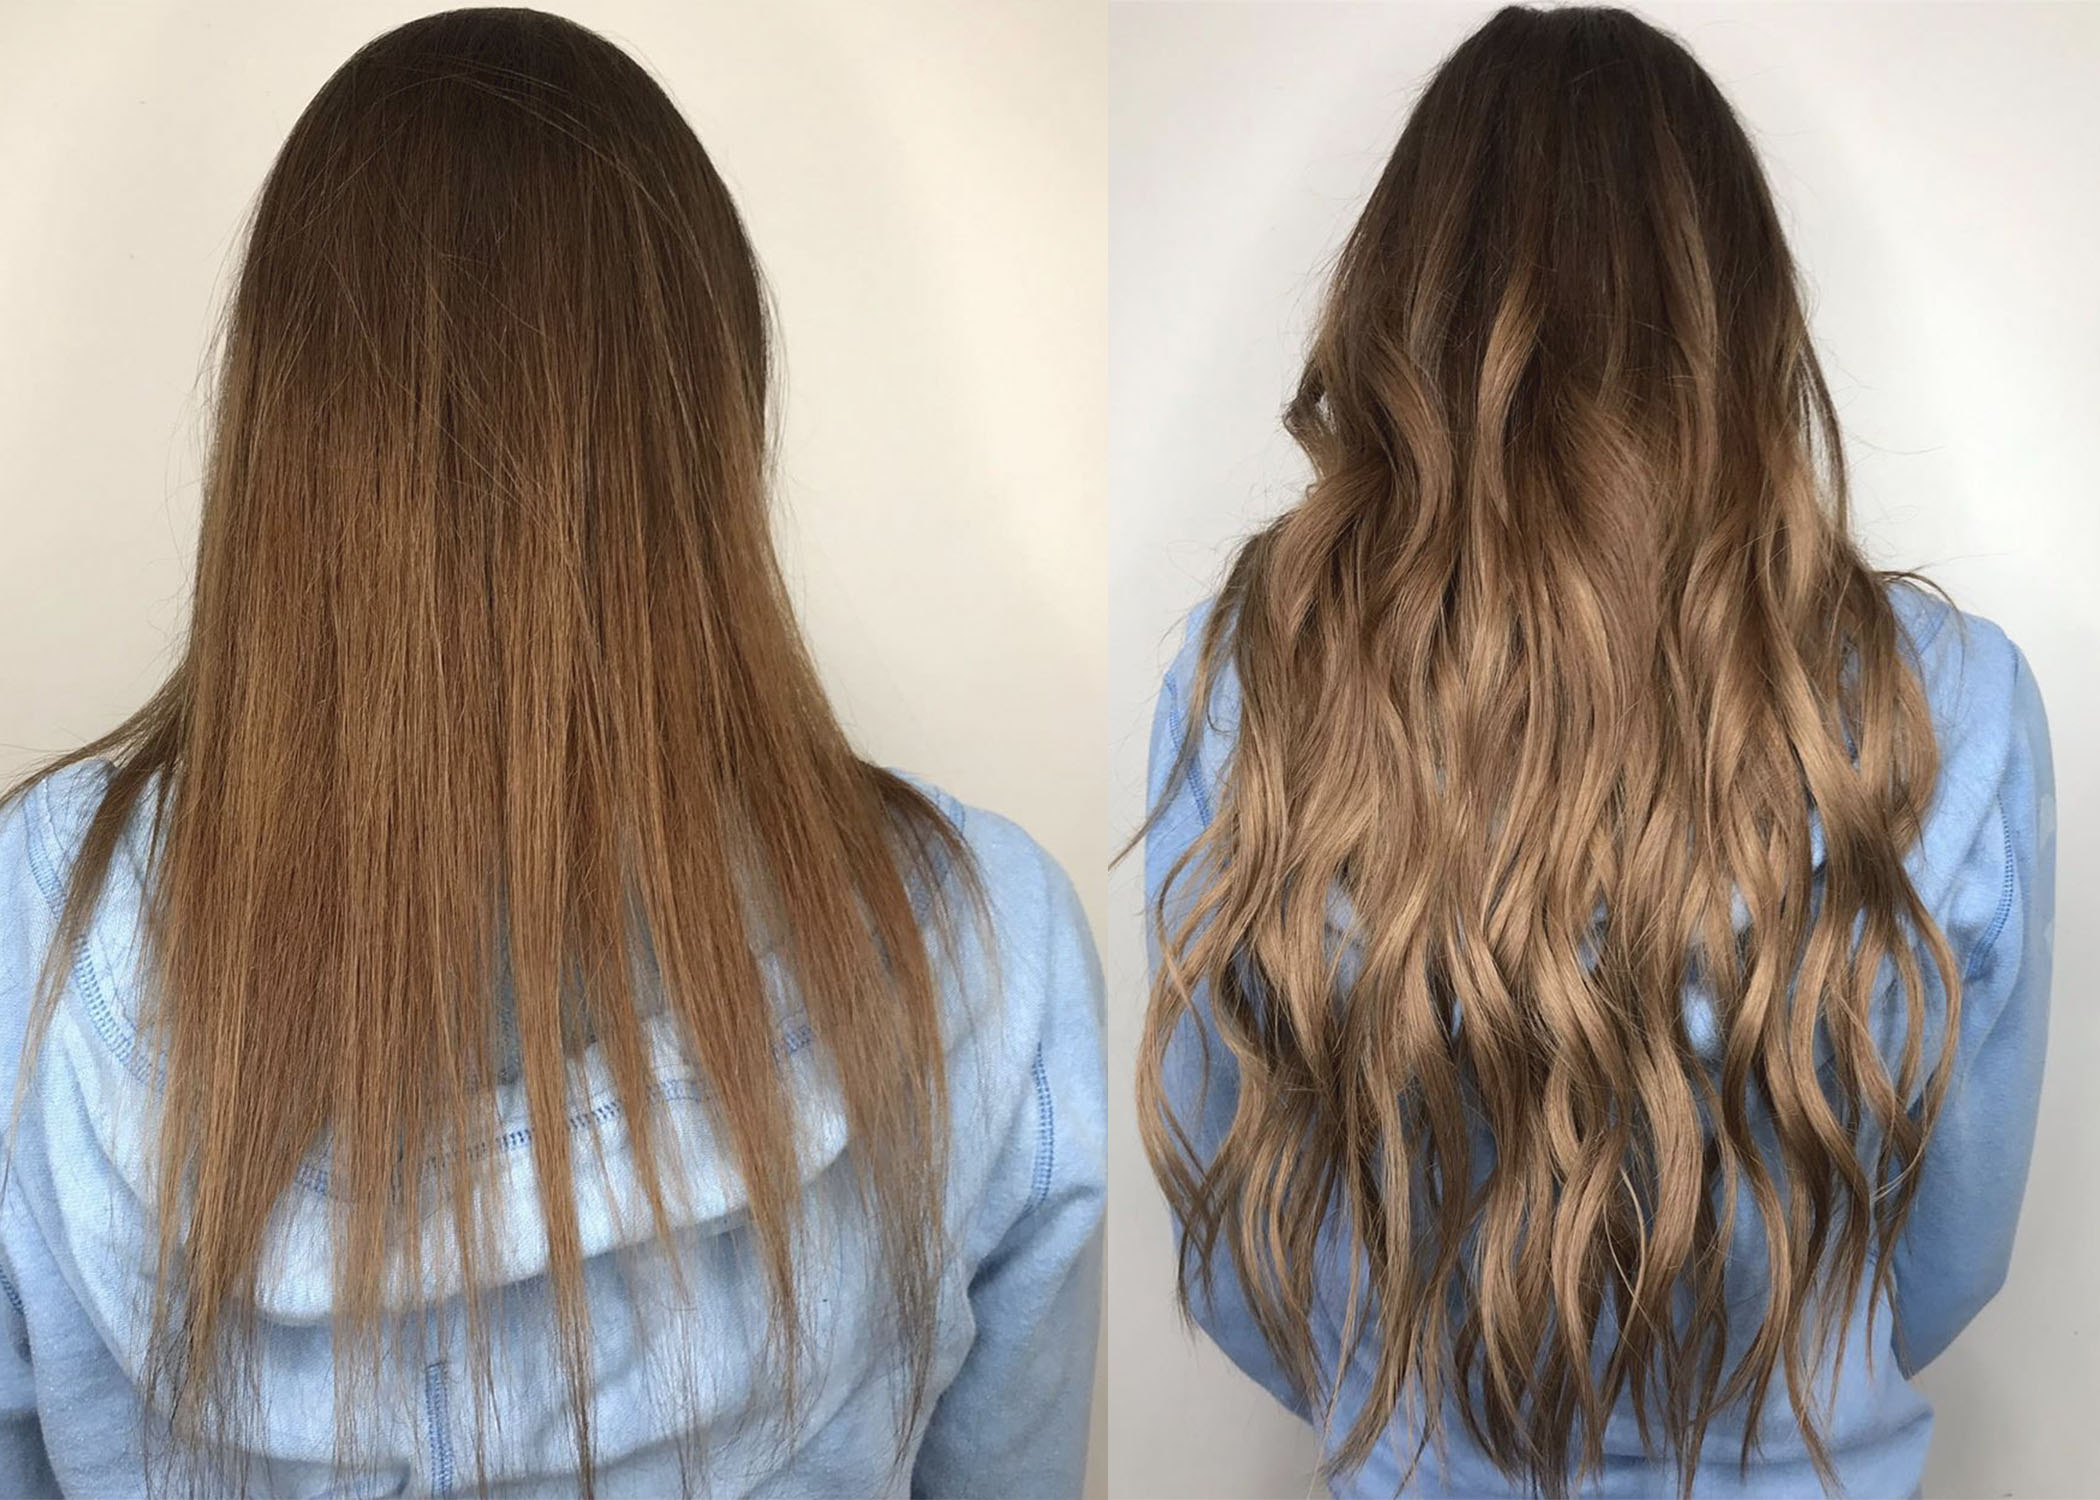 Before and After – Laced Hair Salon